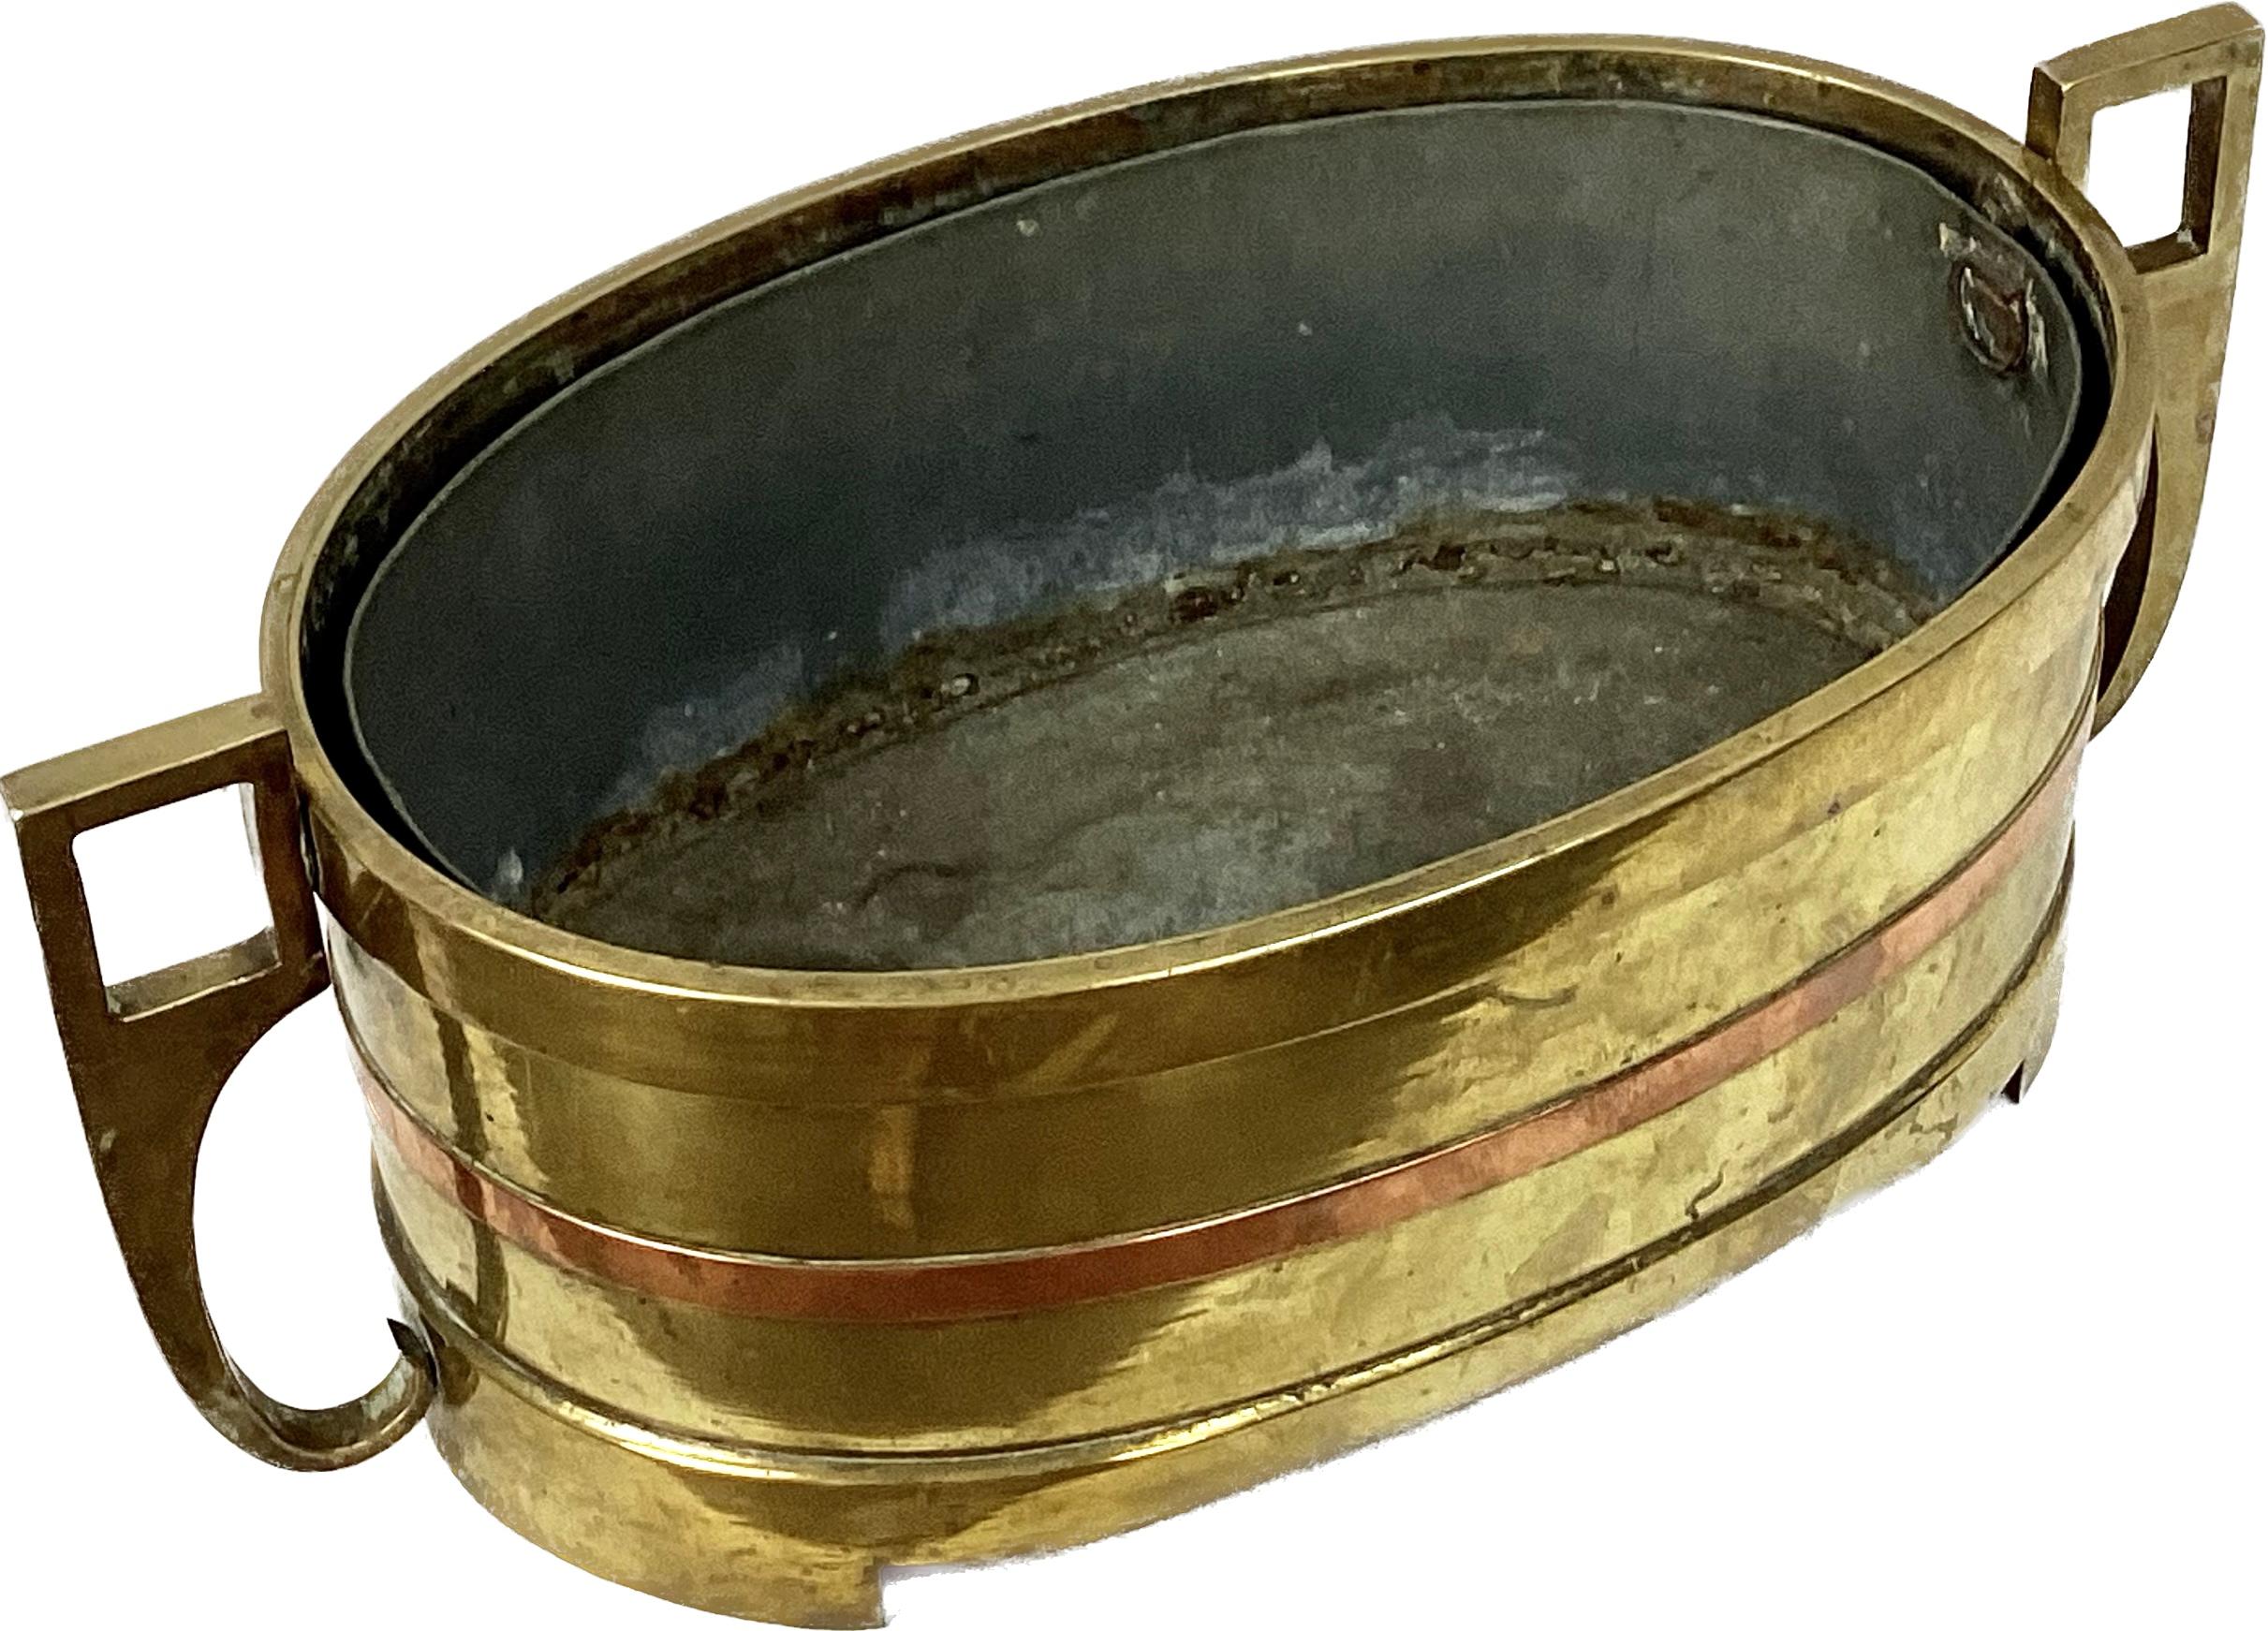 18th / 19th Century Oval Brass Planter with liner, includes band of copper around middle that elevates the look. Has brass handles on either end. Heavy and well made. 